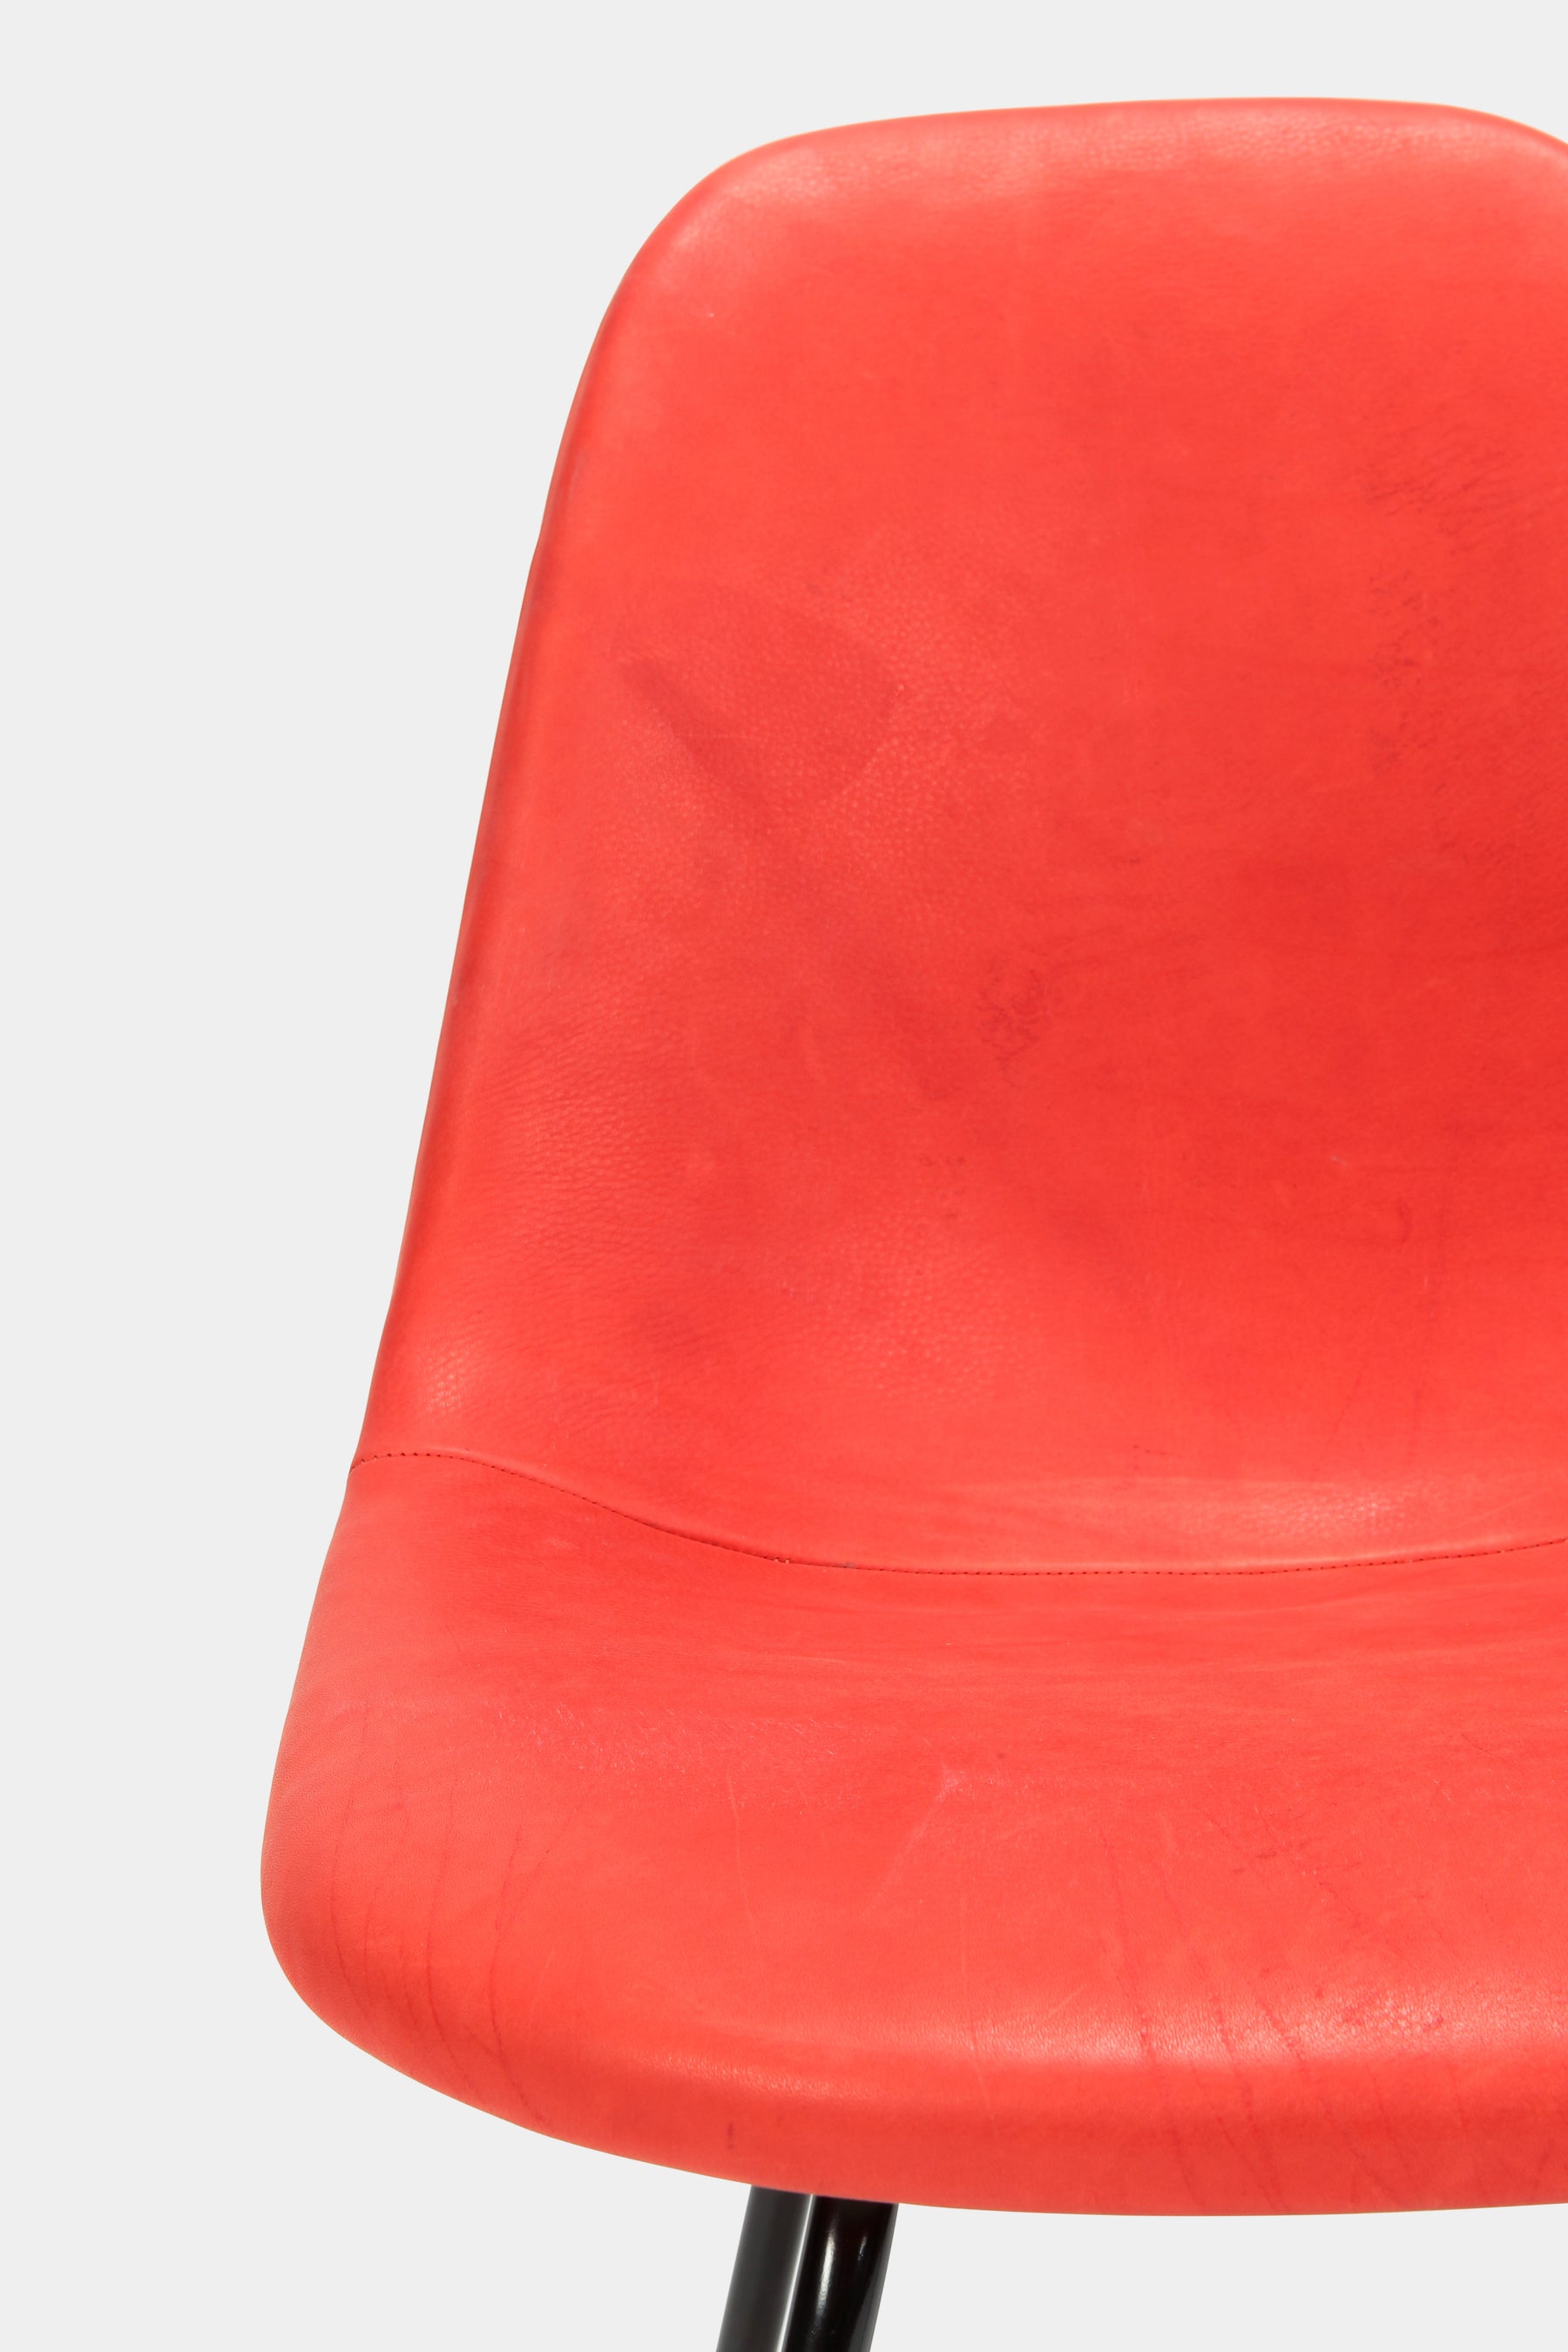 Eames Side Chair Red Leather, 60s